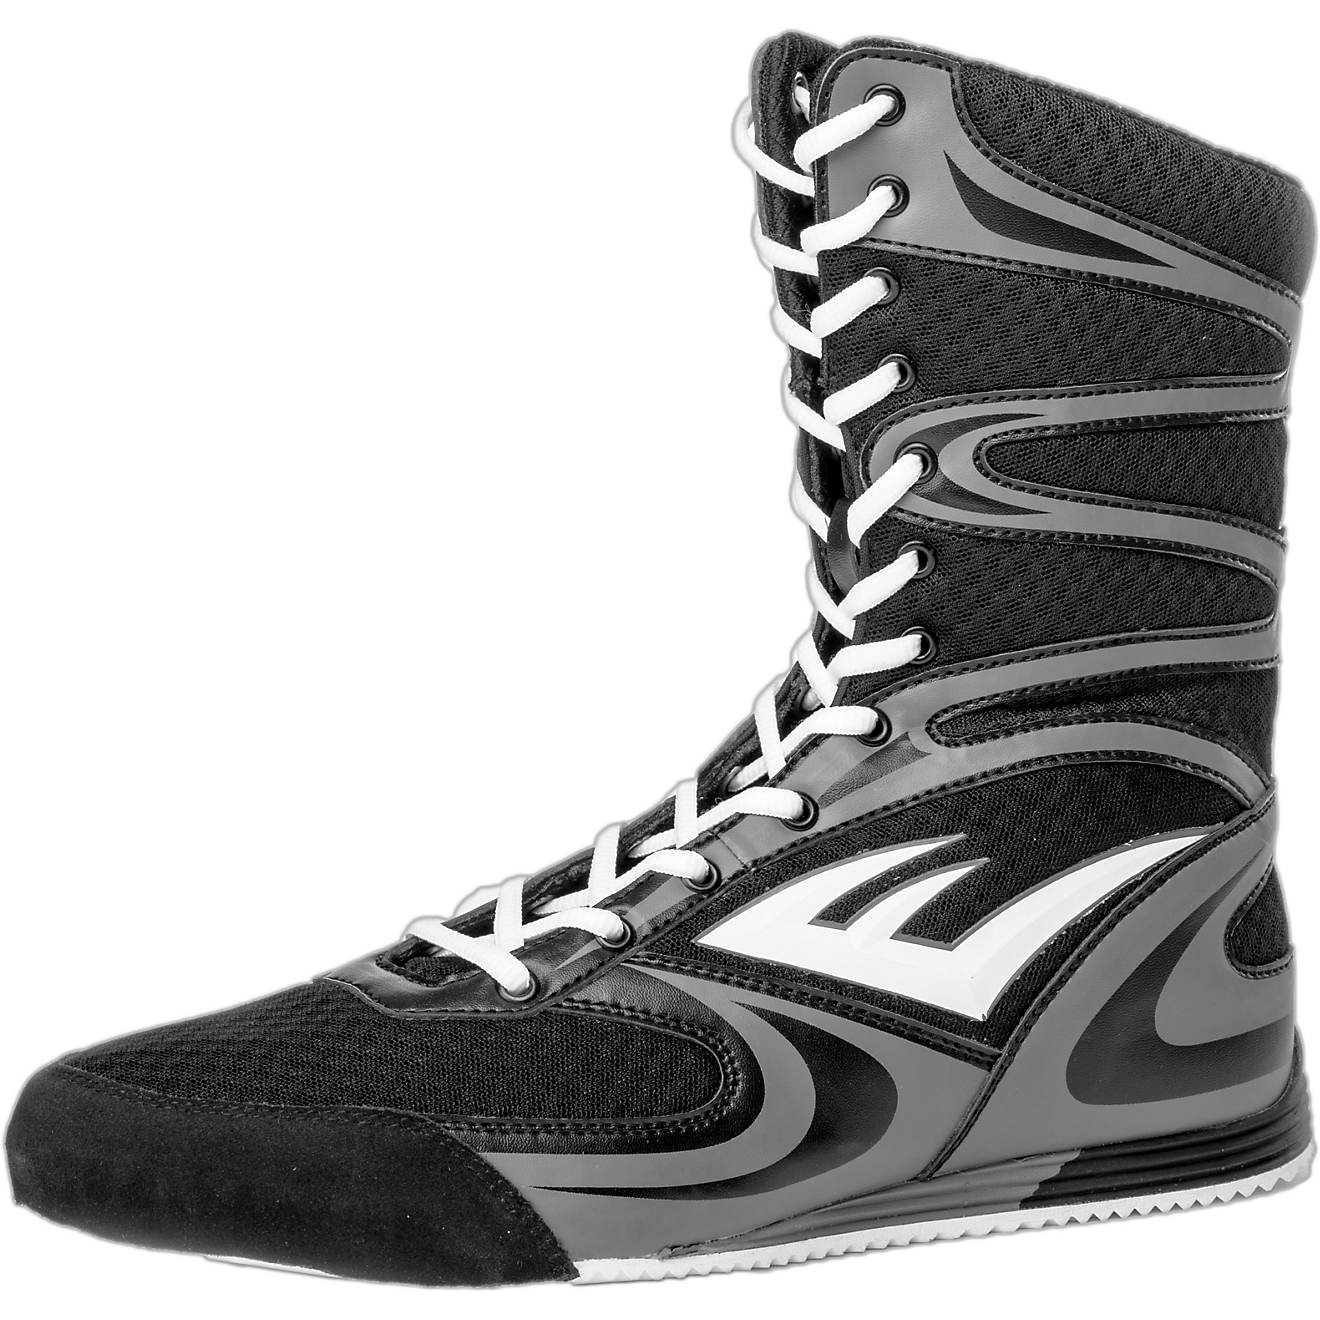 Everlast Men's Contender High-Top Boxing Shoes | Academy